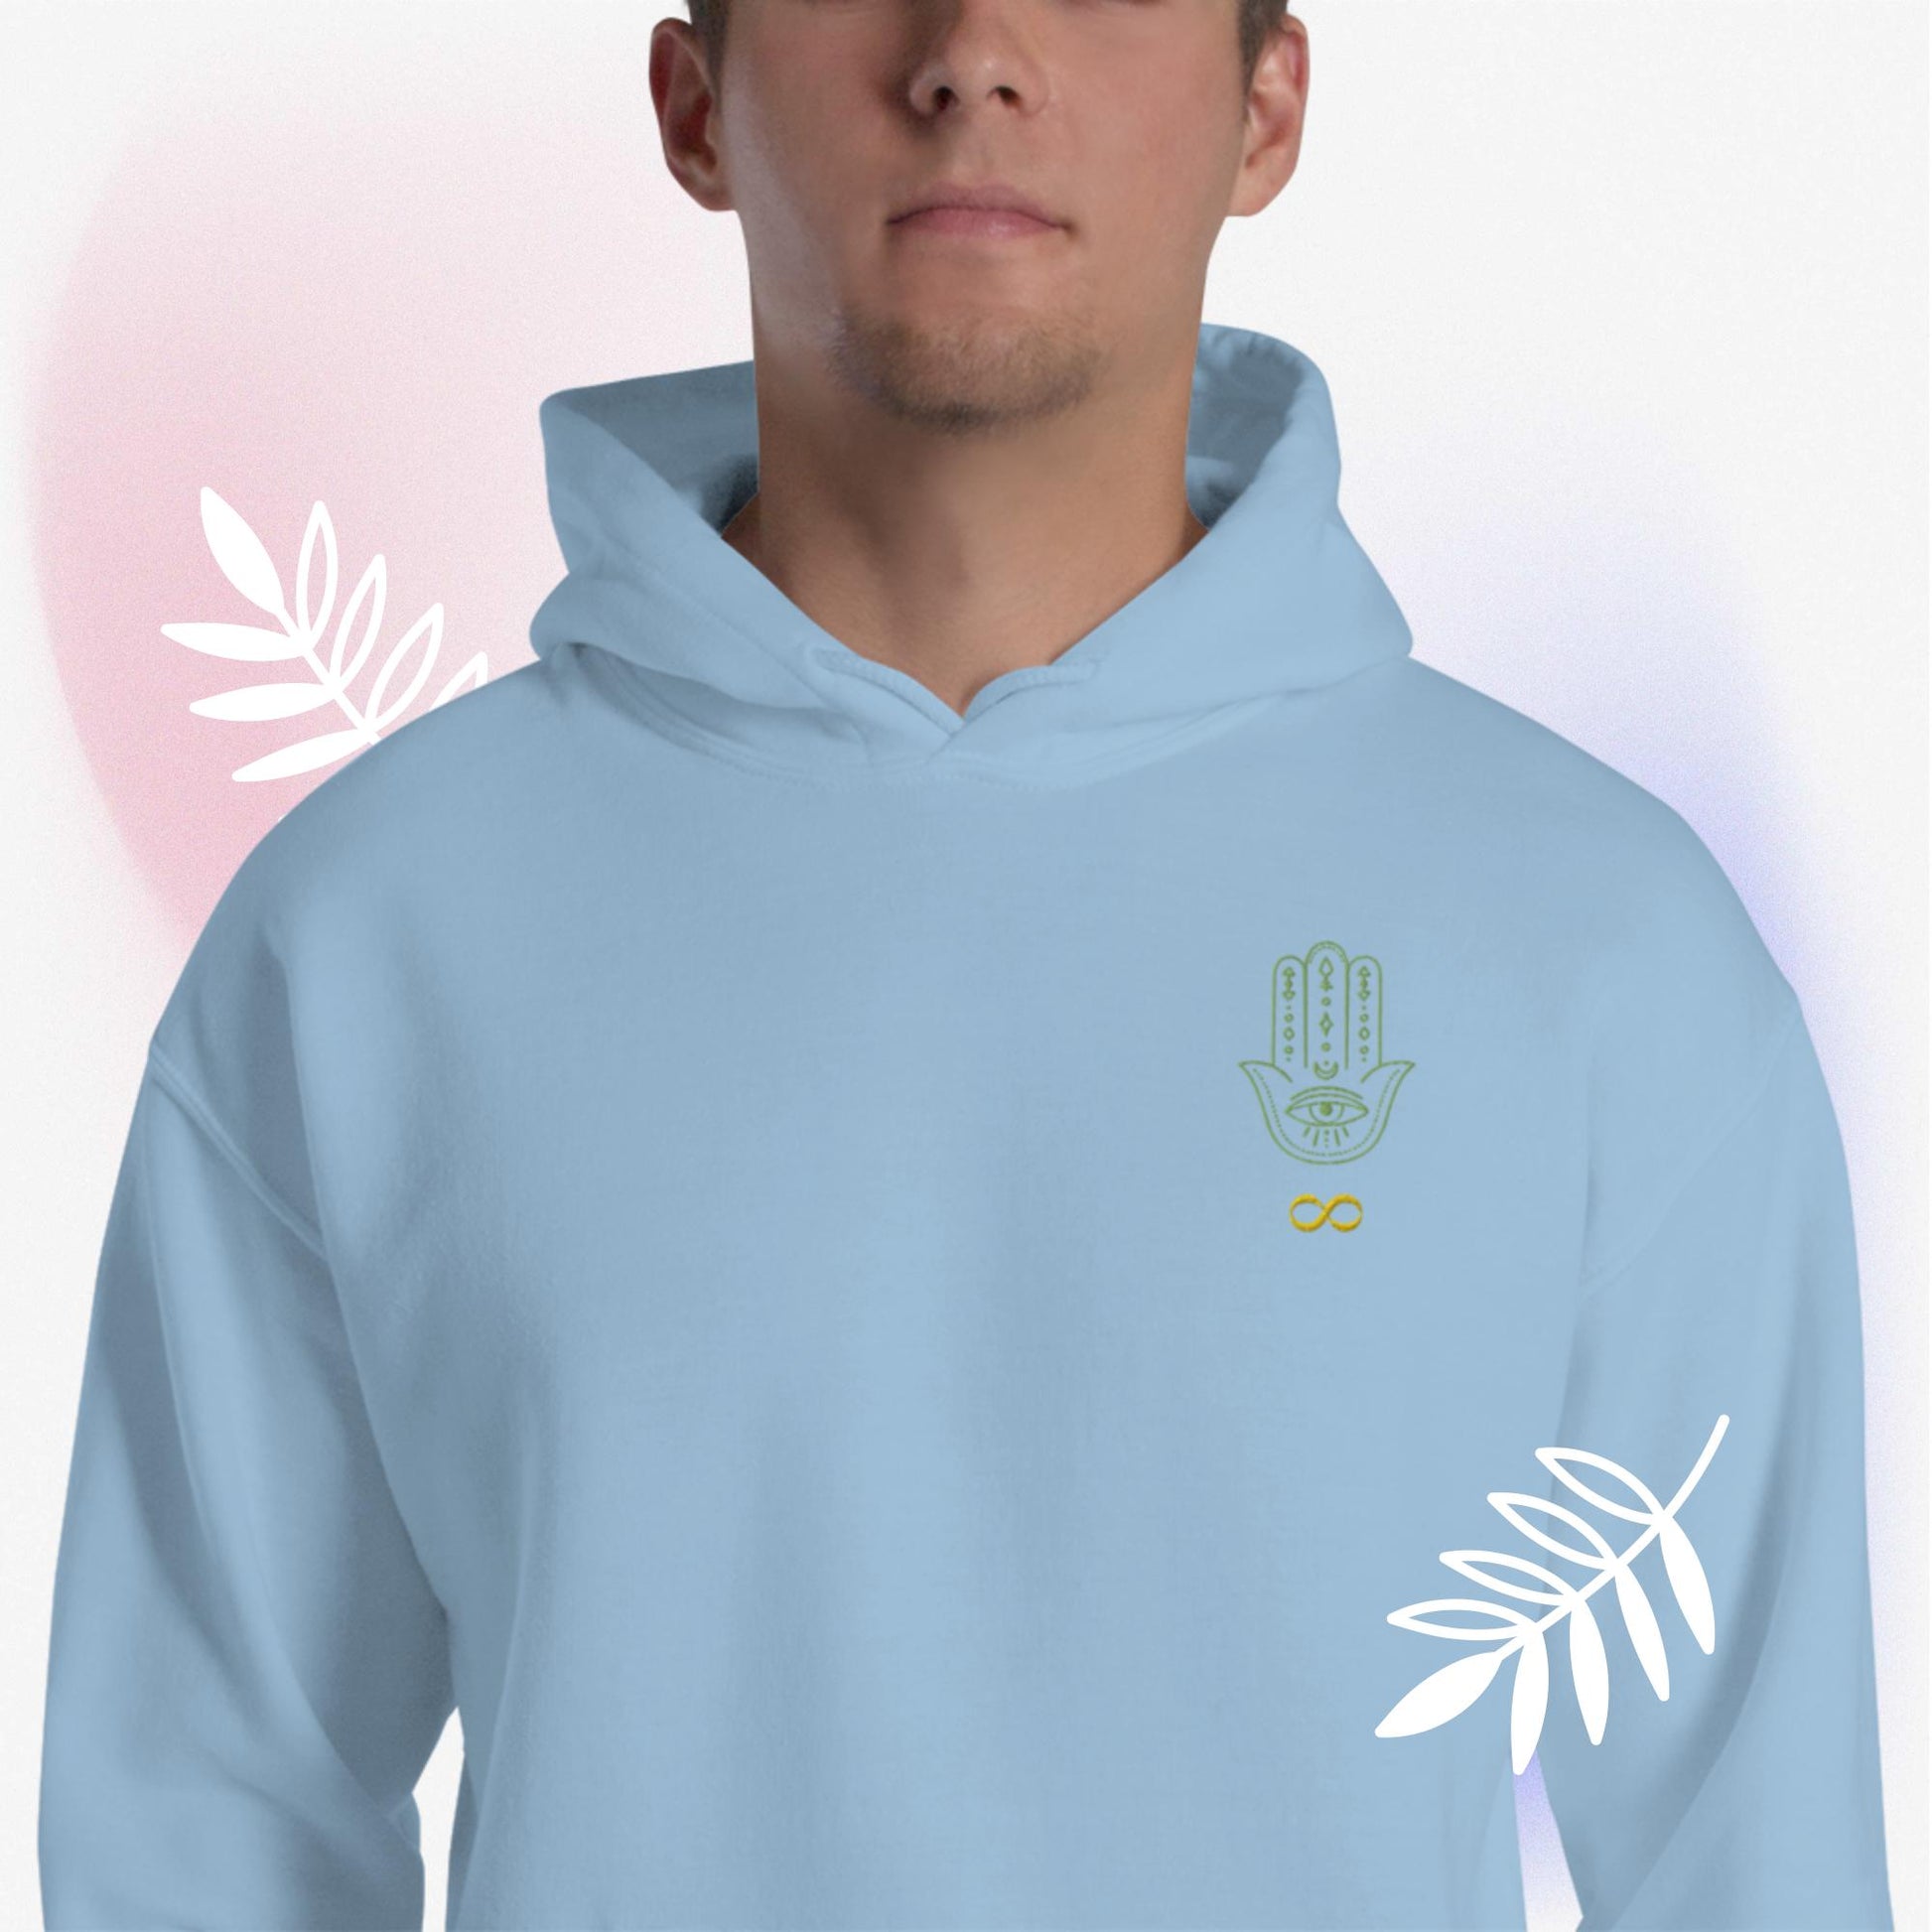 Gildan 18500, designer brand, unisex, heavy blend, hoodie. Front of hoodie has JAMILLIAH'S WISDOM IS TIMELESS SHOP's brand logo of a hamsa hand and infinity symbol. Worn by male model, surrounded by white leaves, and pink hue. JAMILLIAH'S WISDOM IS TIMELESS SHOP - wisdomistimeless.com.